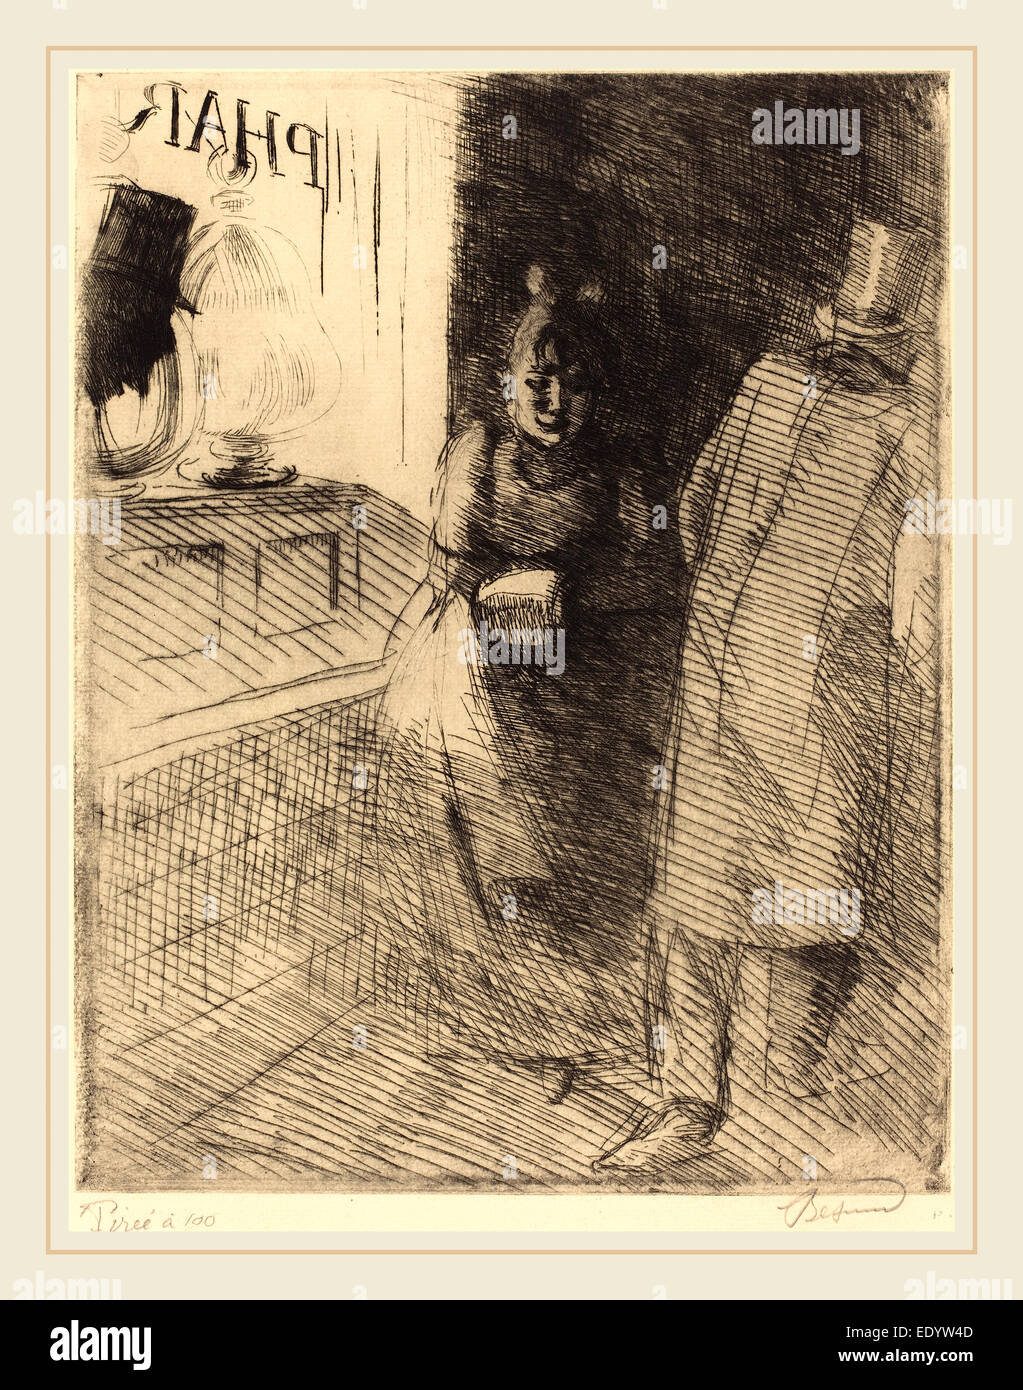 Albert Besnard, French (1849-1934), Prostitution (La Prostitution), c. 1886, etching and drypoint on laid paper Stock Photo